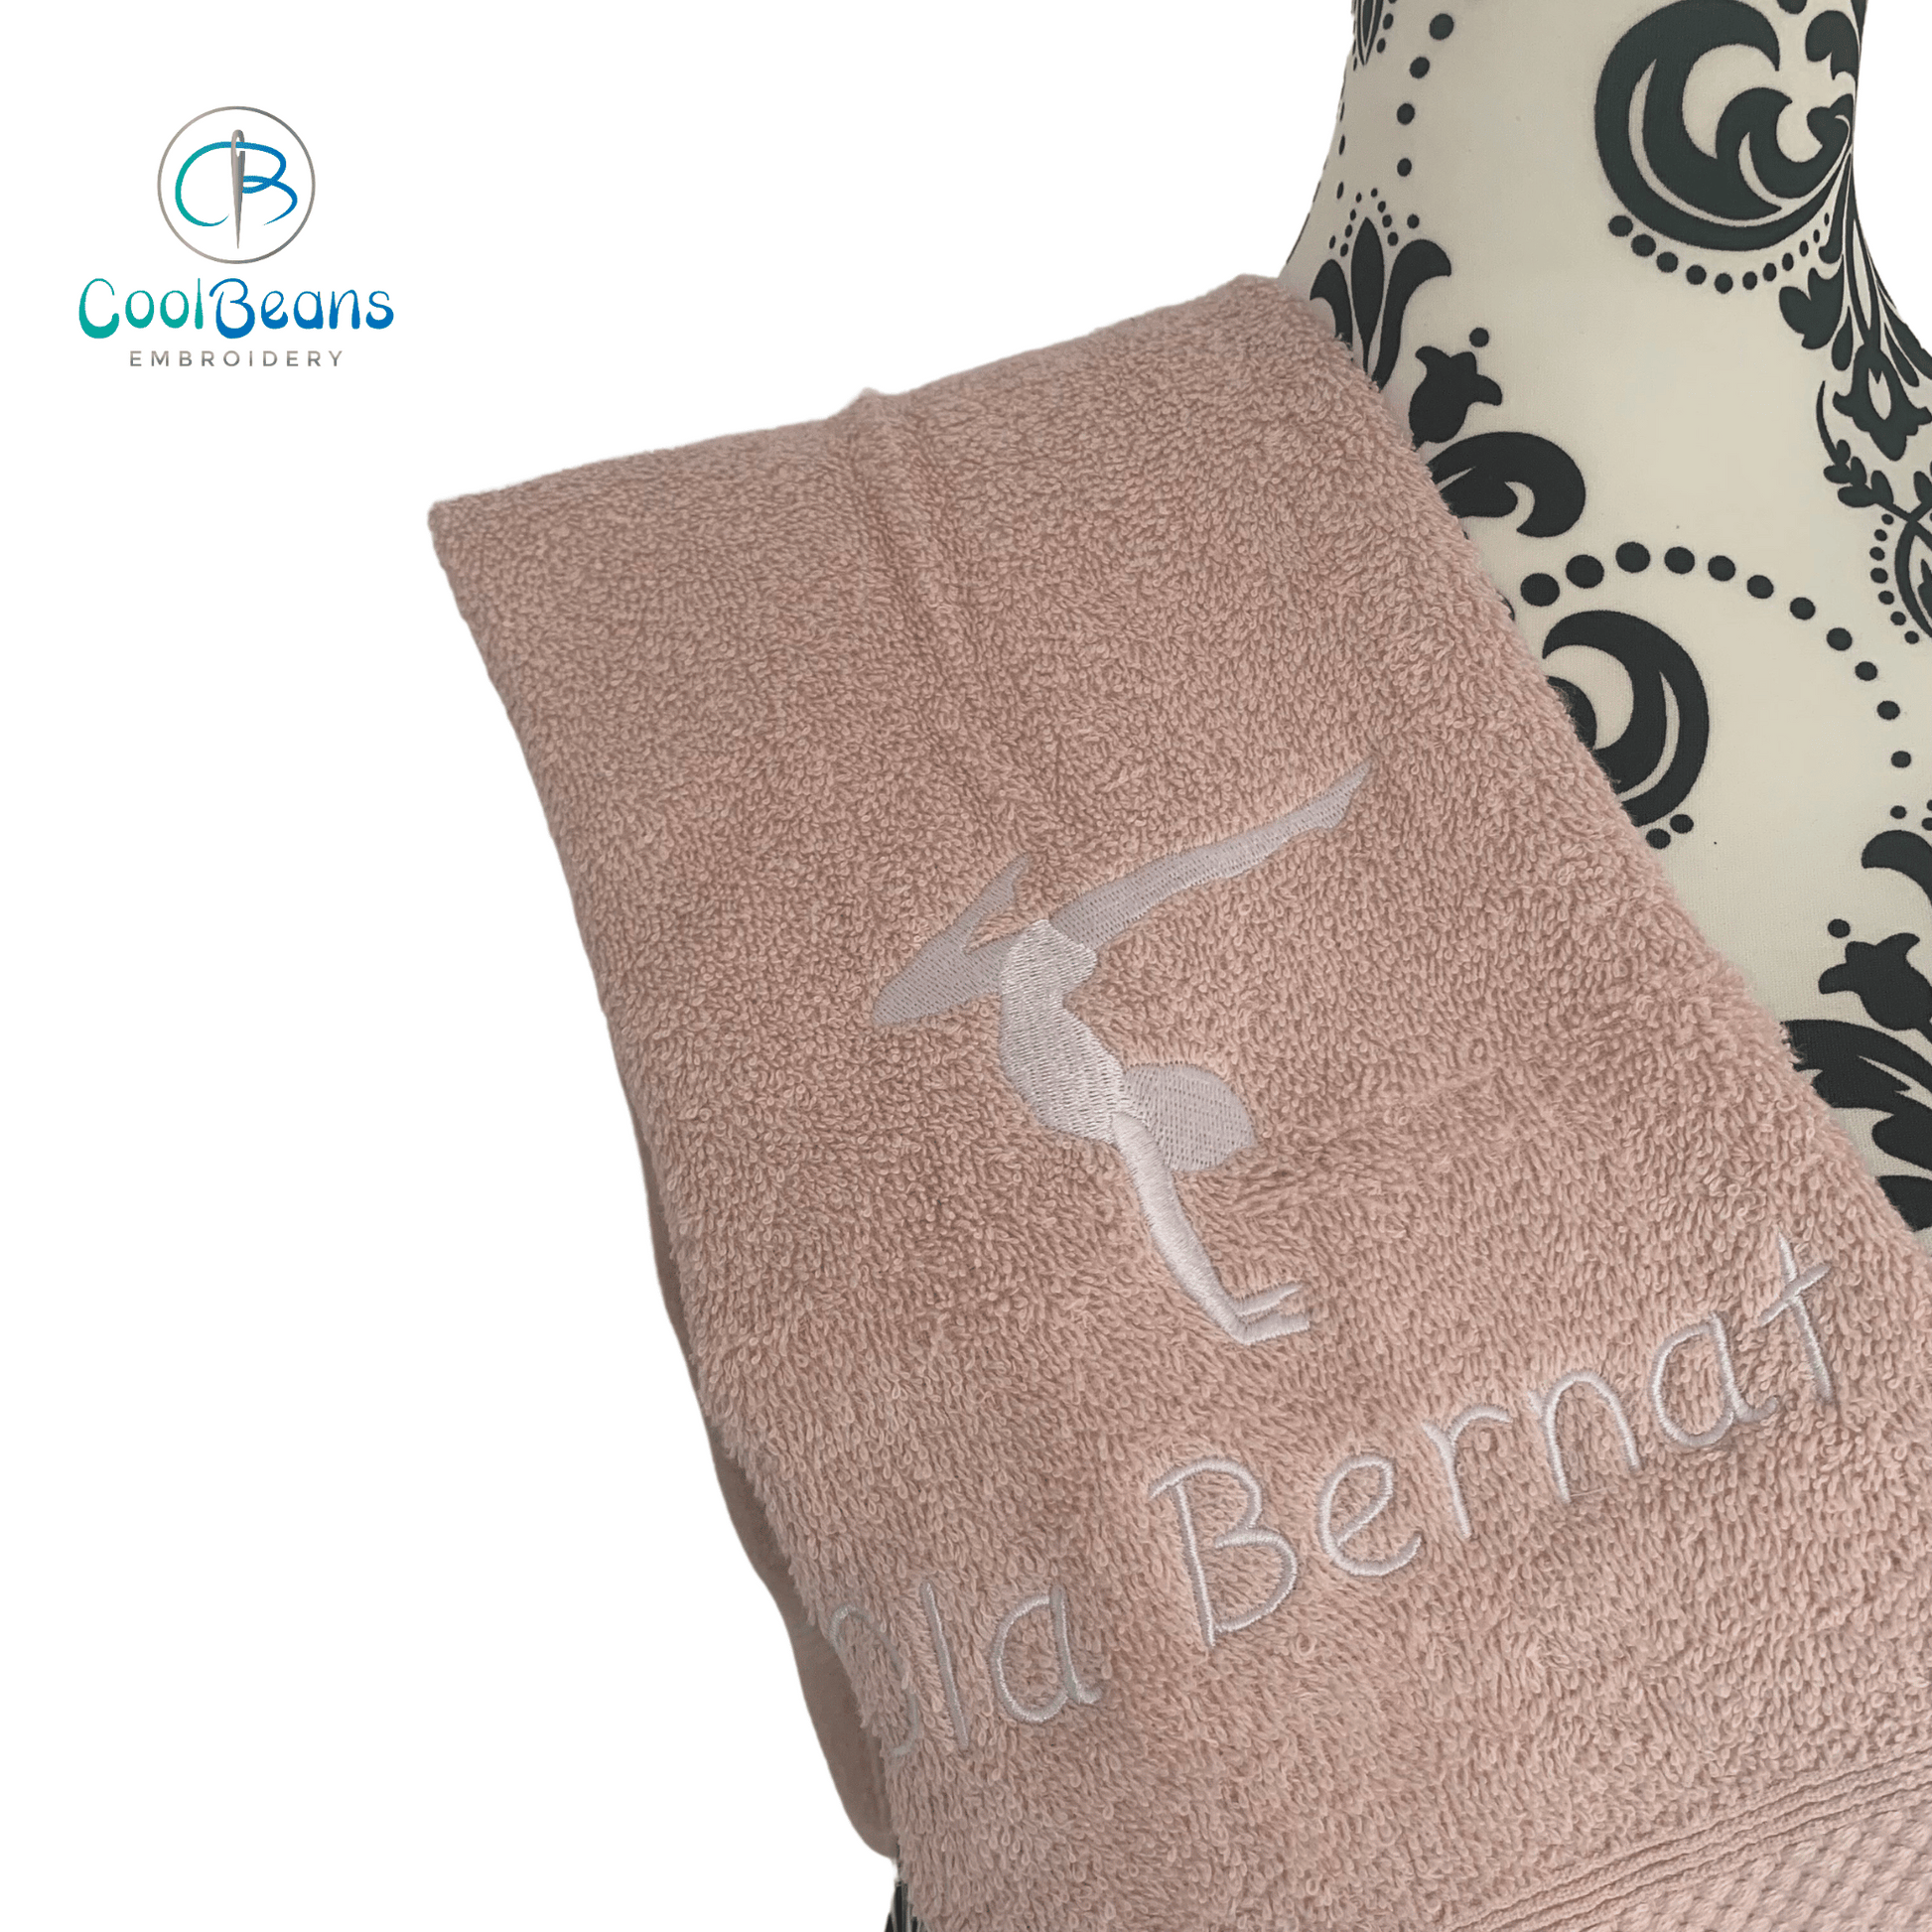 Acro Dance Embroidered Towel - Dusky Pink